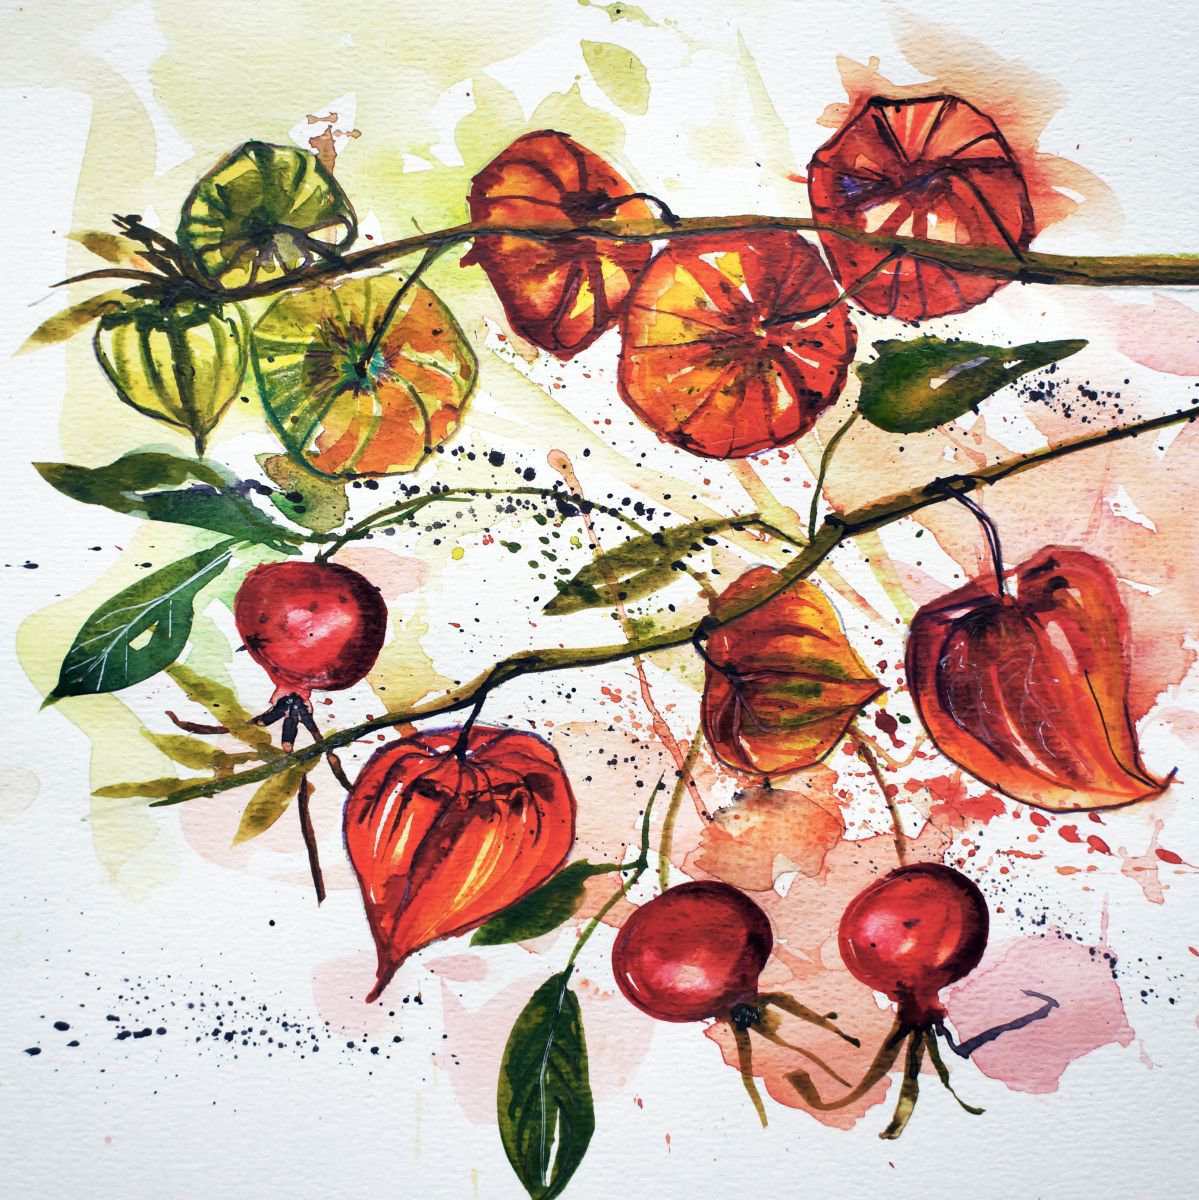 Chinese Lanterns - Physalis (with rose hips) by Julia Rigby